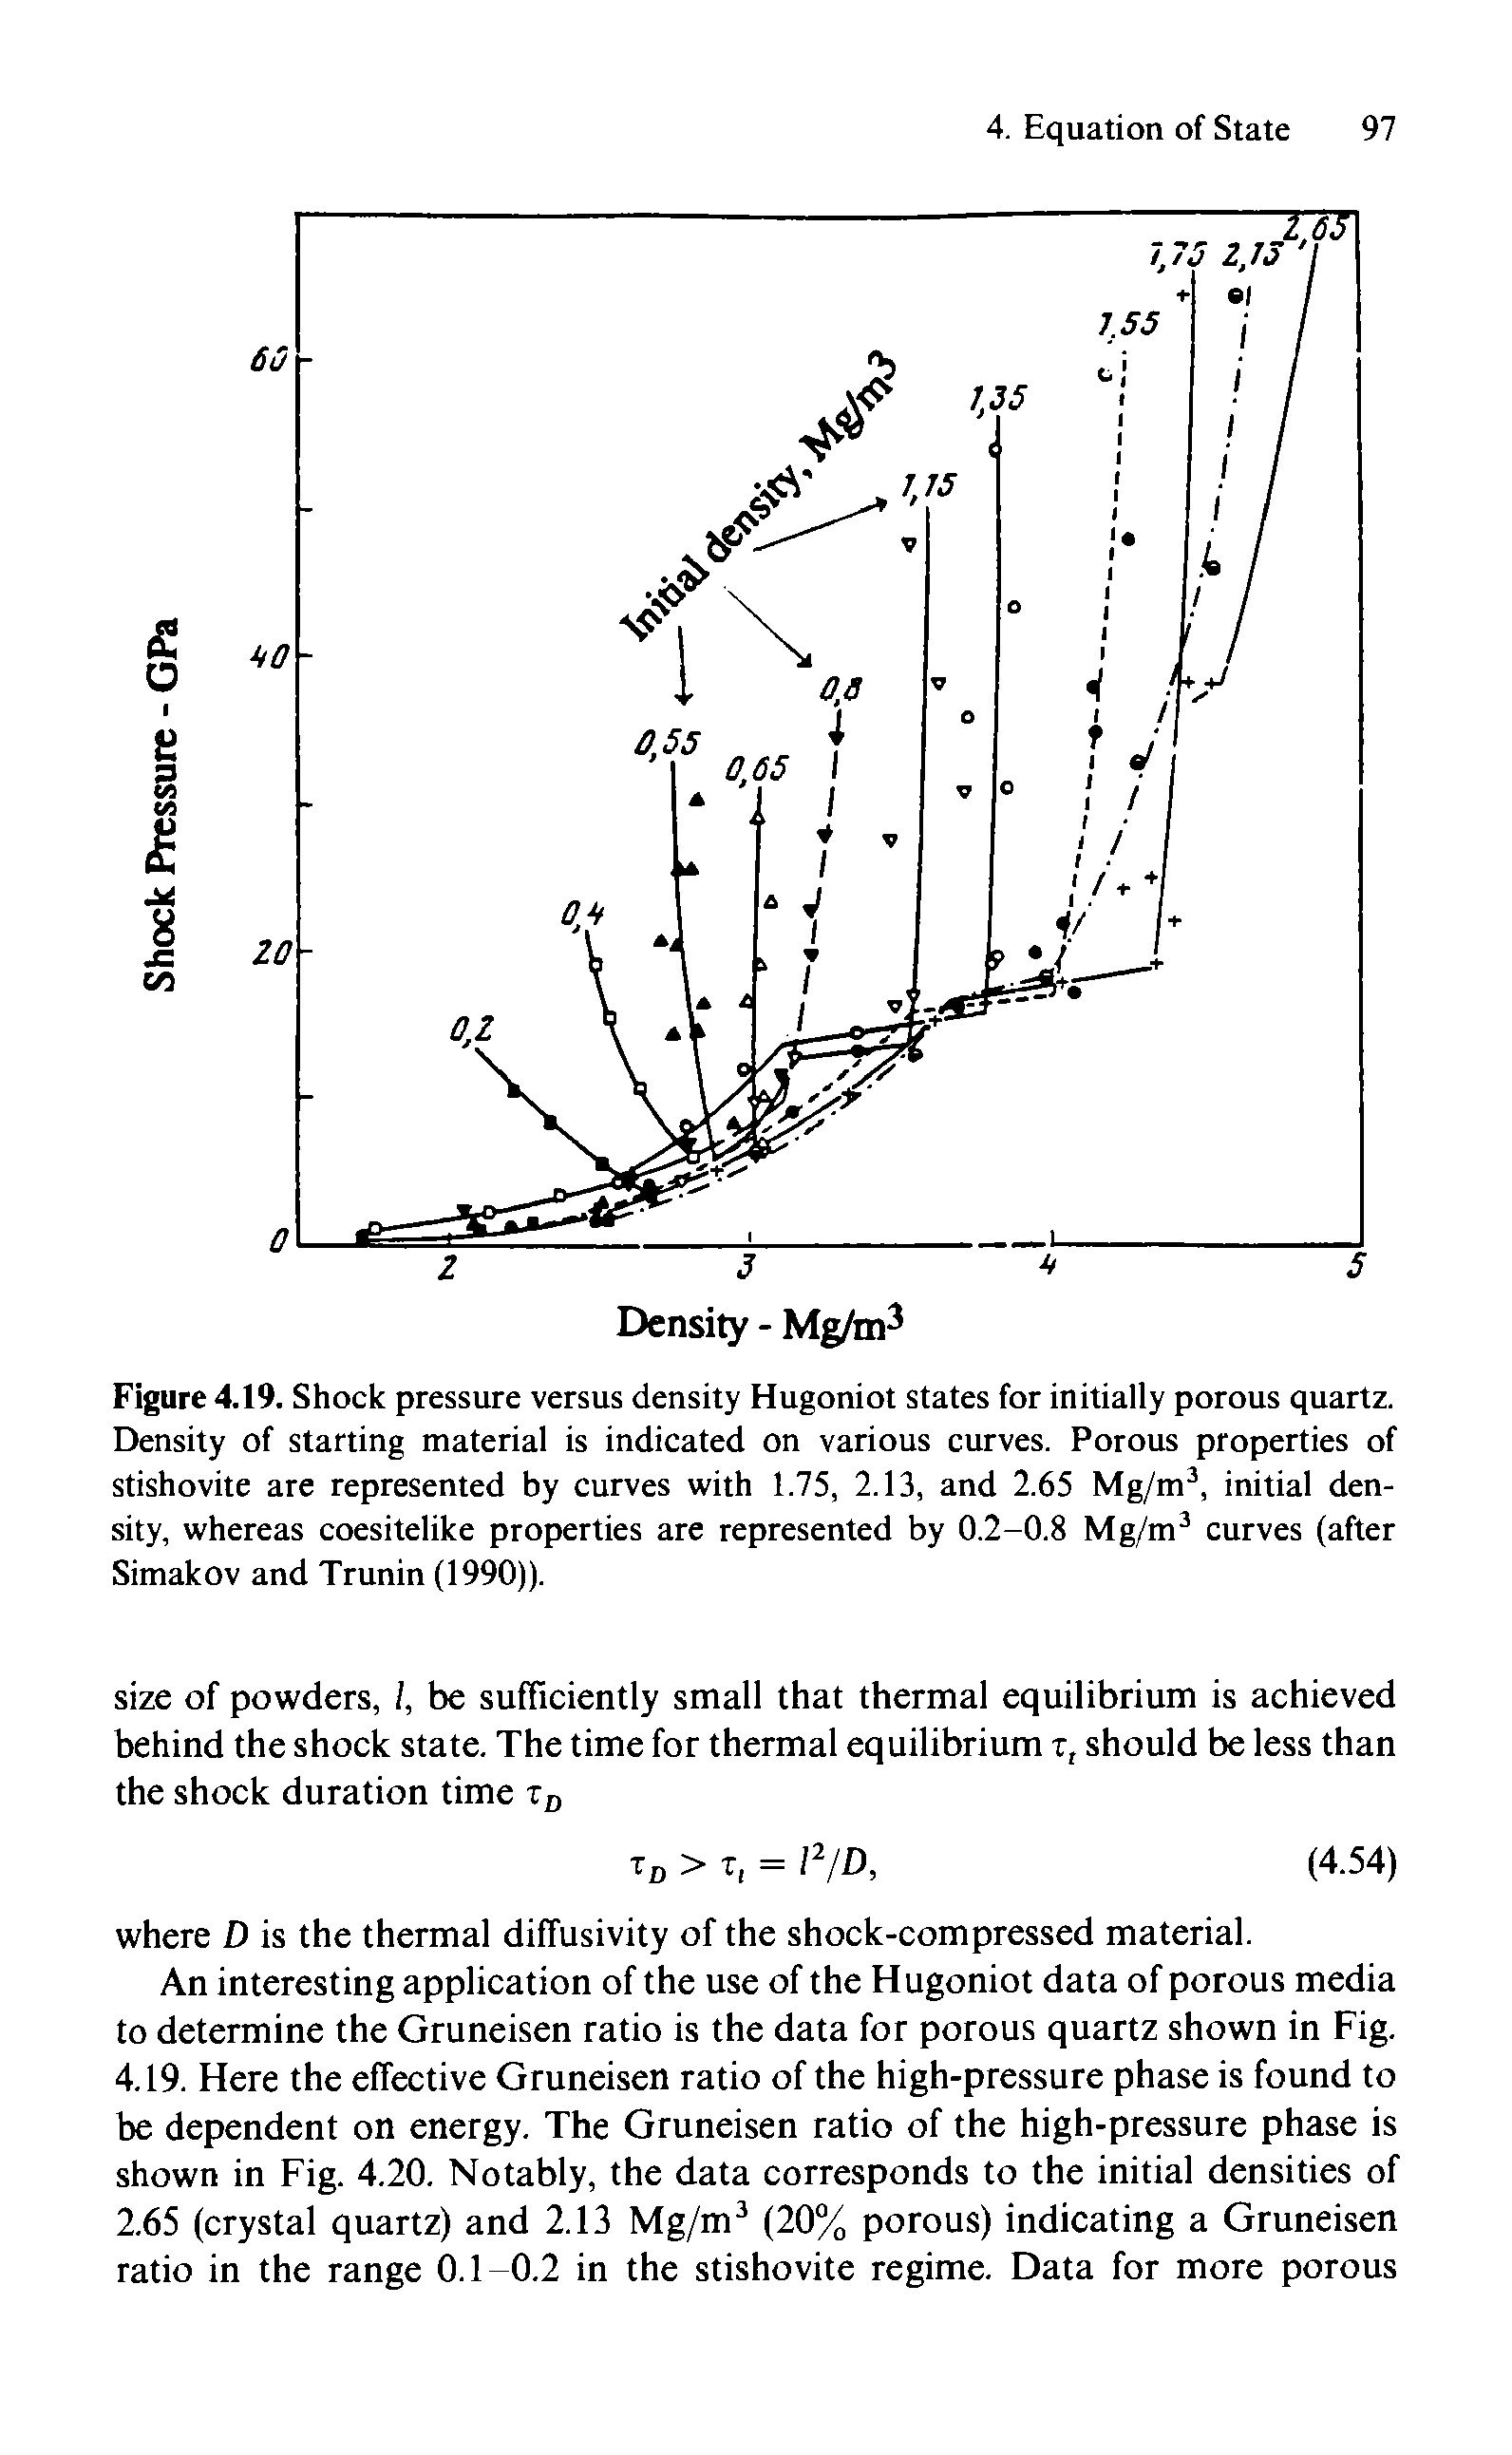 Figure 4.19. Shock pressure versus density Hugoniot states for initially porous quartz. Density of starting material is indicated on various curves. Porous properties of stishovite are represented by curves with 1.75, 2.13, and 2.65 Mg/m, initial density, whereas coesitelike properties are represented by 0.2-0.8 Mg/m curves (after Simakov and Trunin (1990)).